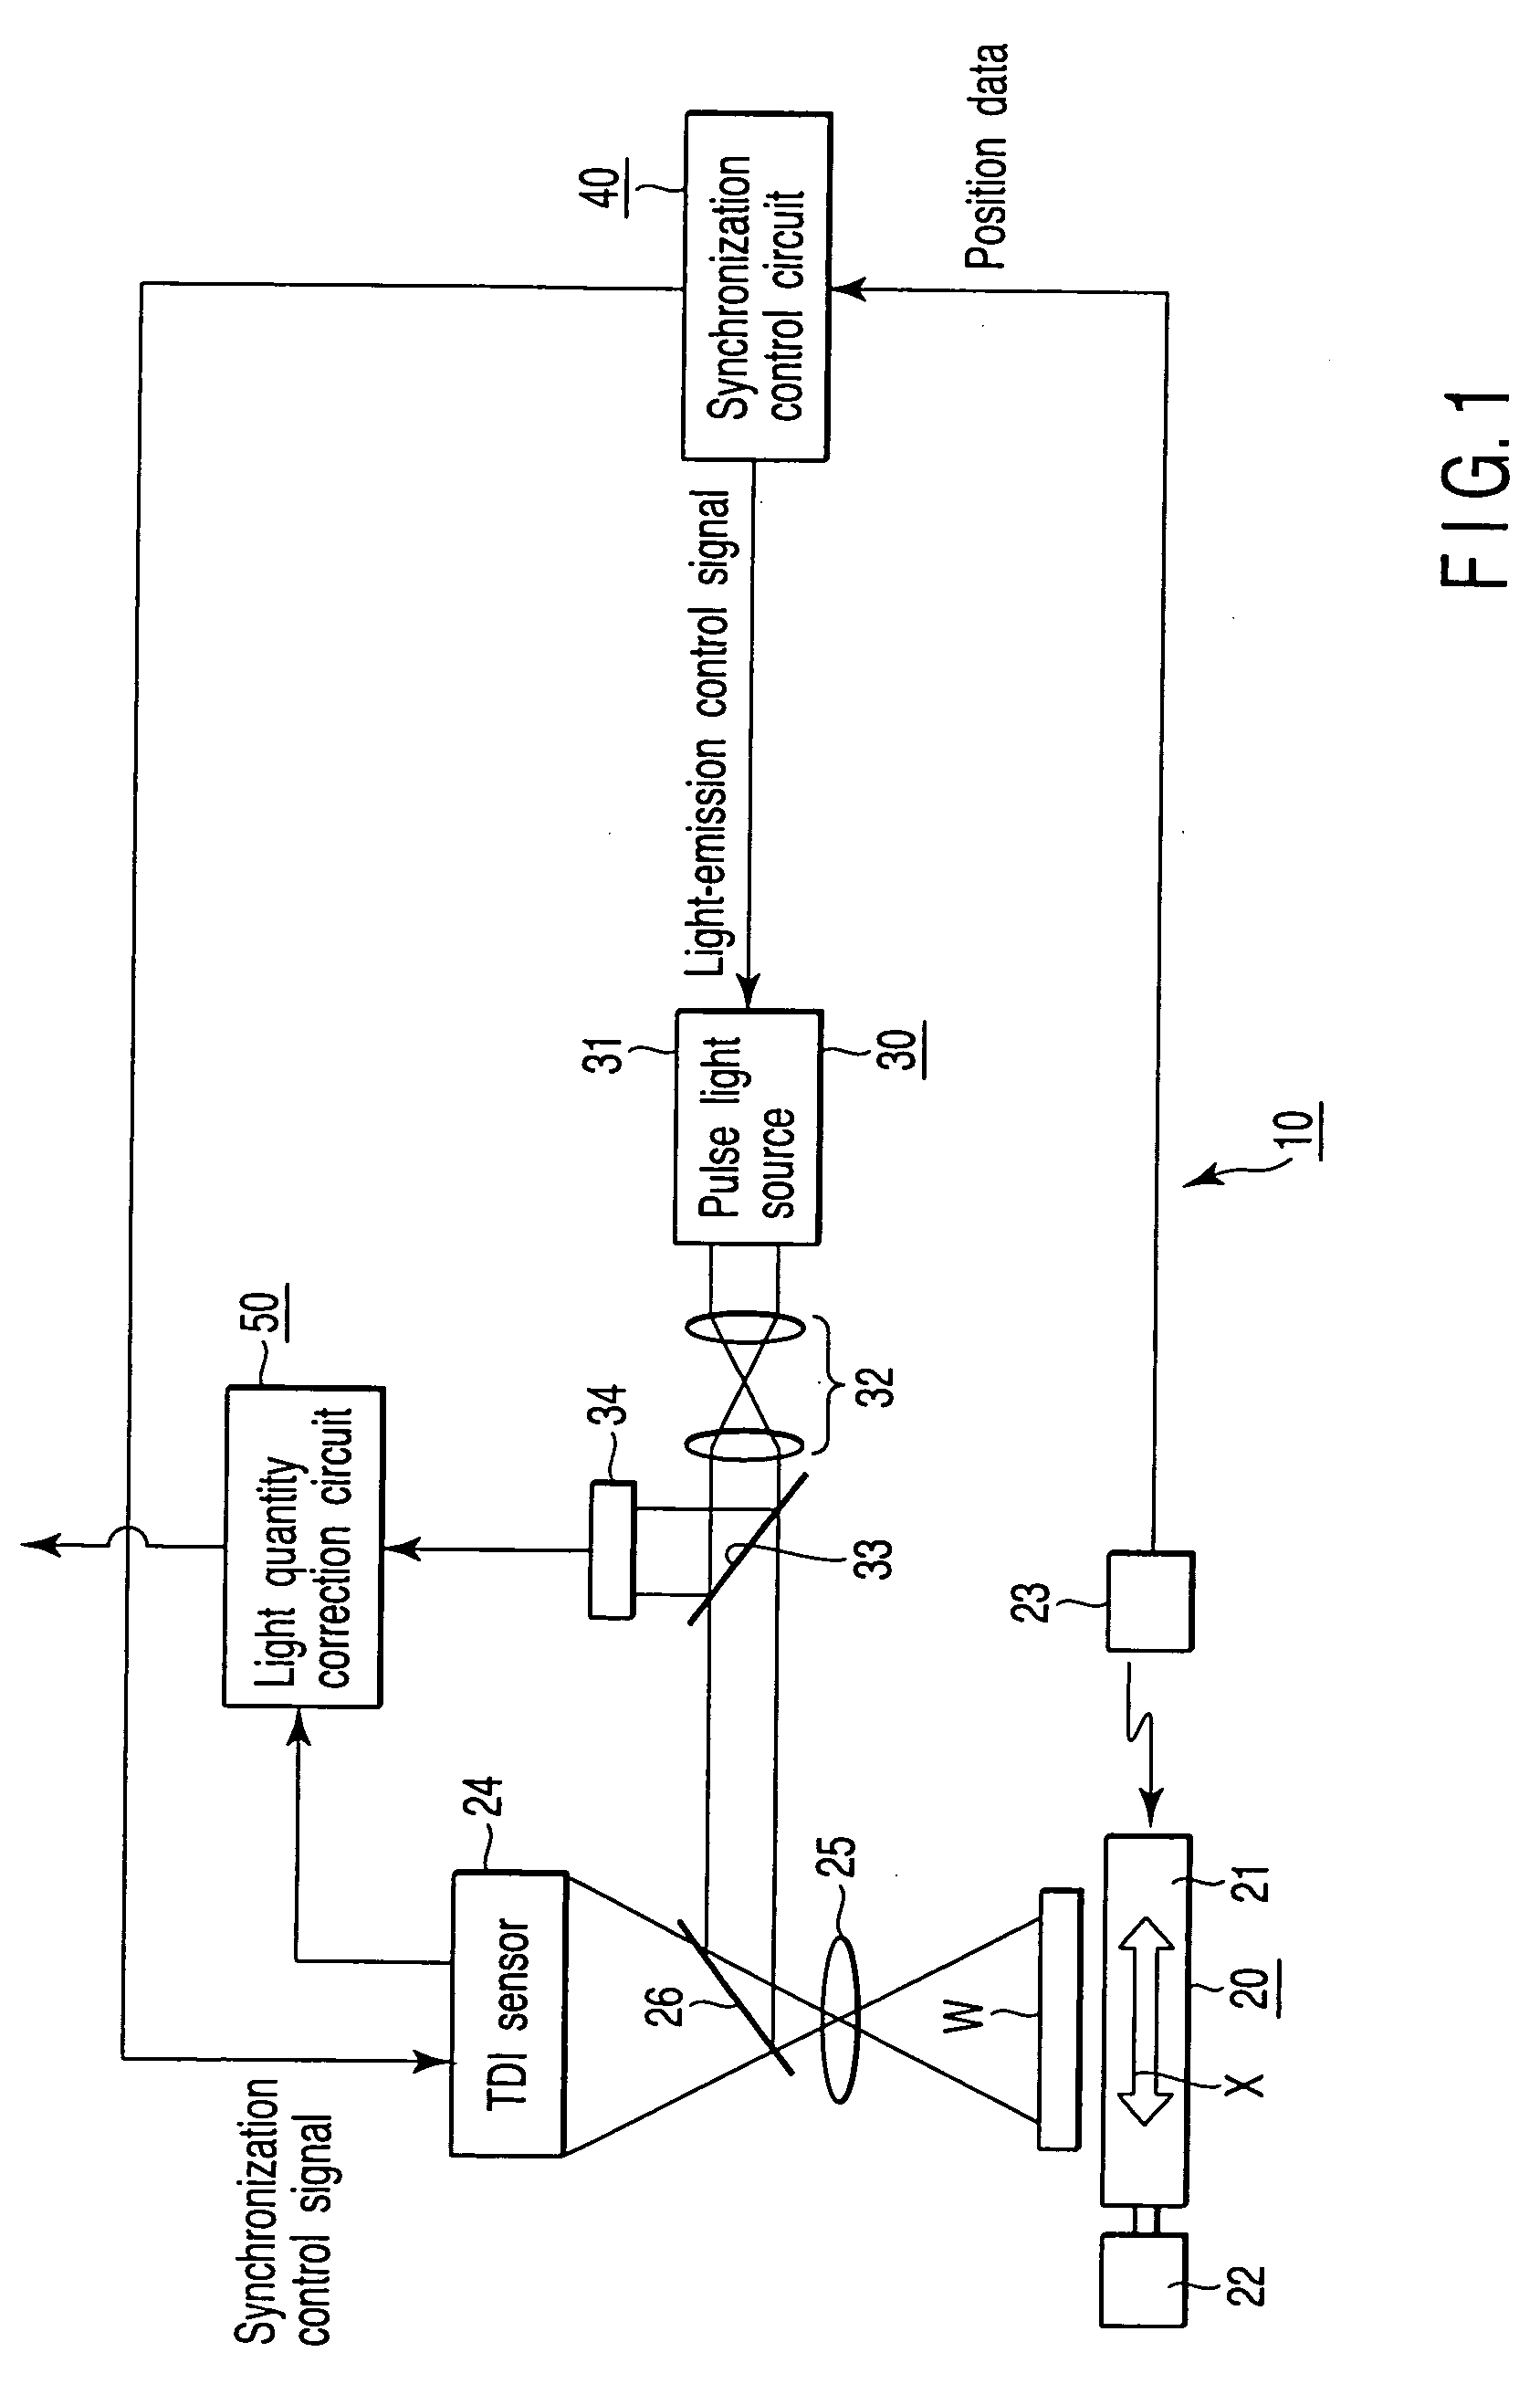 Image input apparatus and inspection apparatus